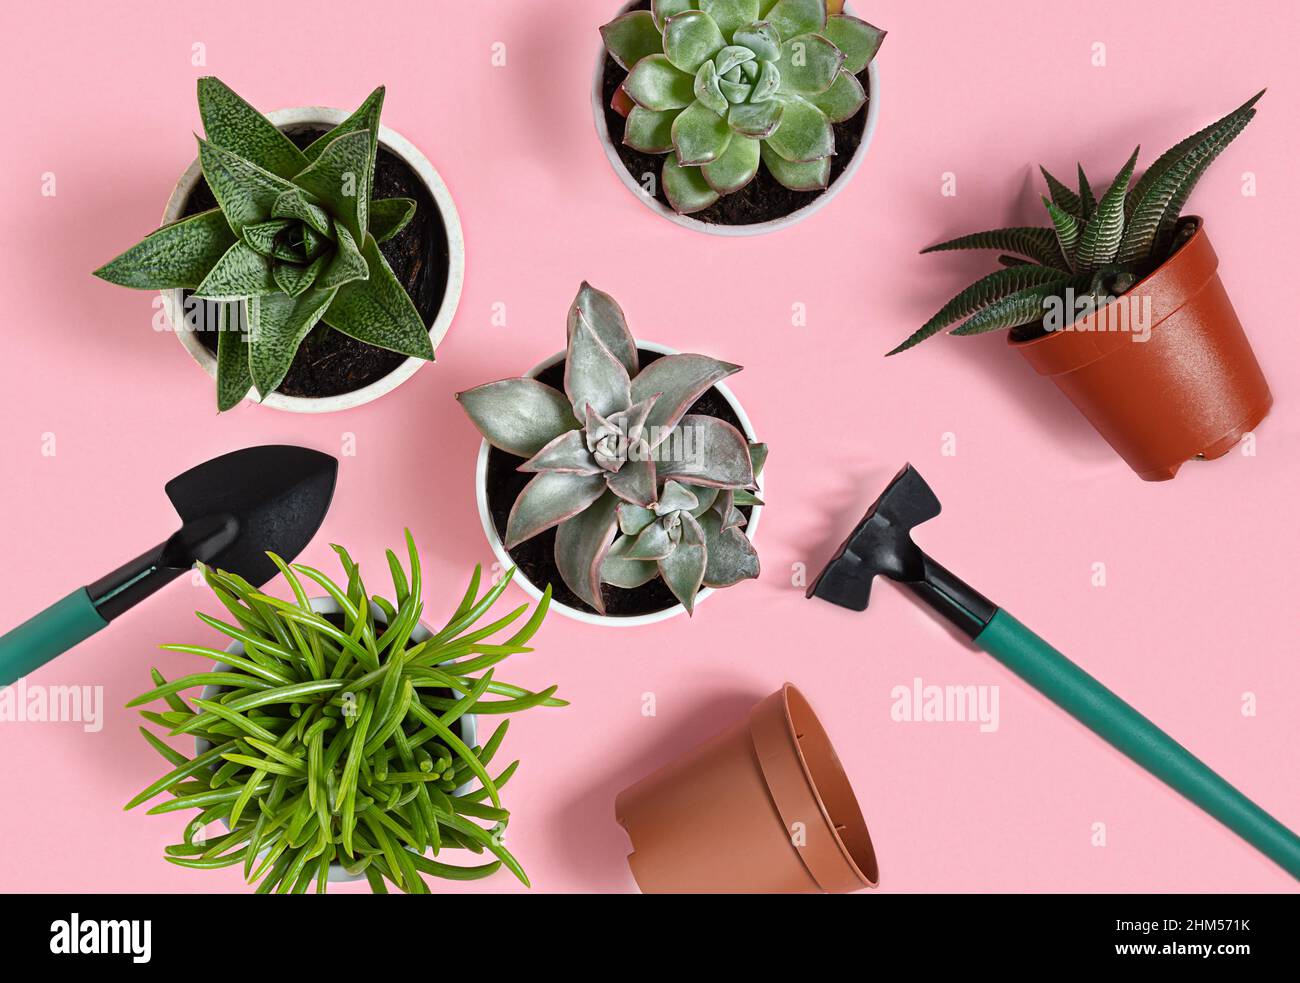 Succulent home plants: gasteria, echeveria, senecio, pachyphytum and haworthia and gardening tools on the pink background, top view, mini plants and h Stock Photo